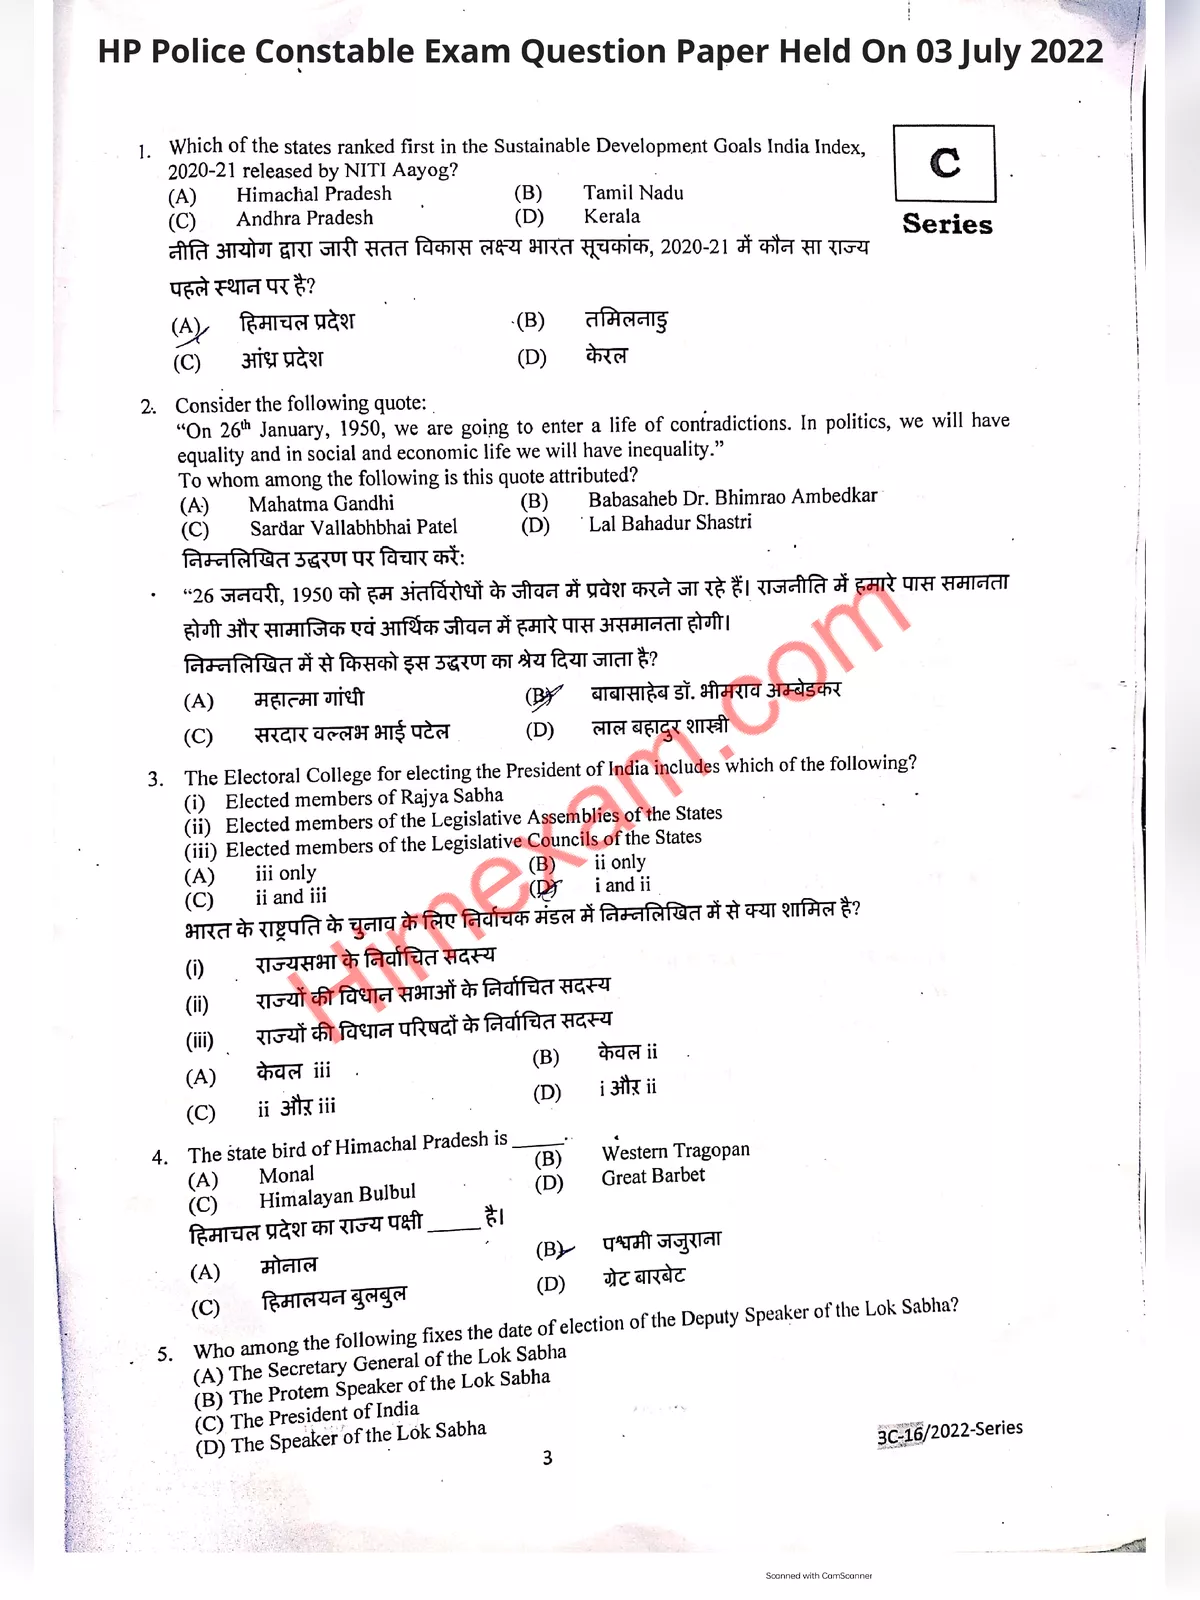 HP Police Question Paper 2022